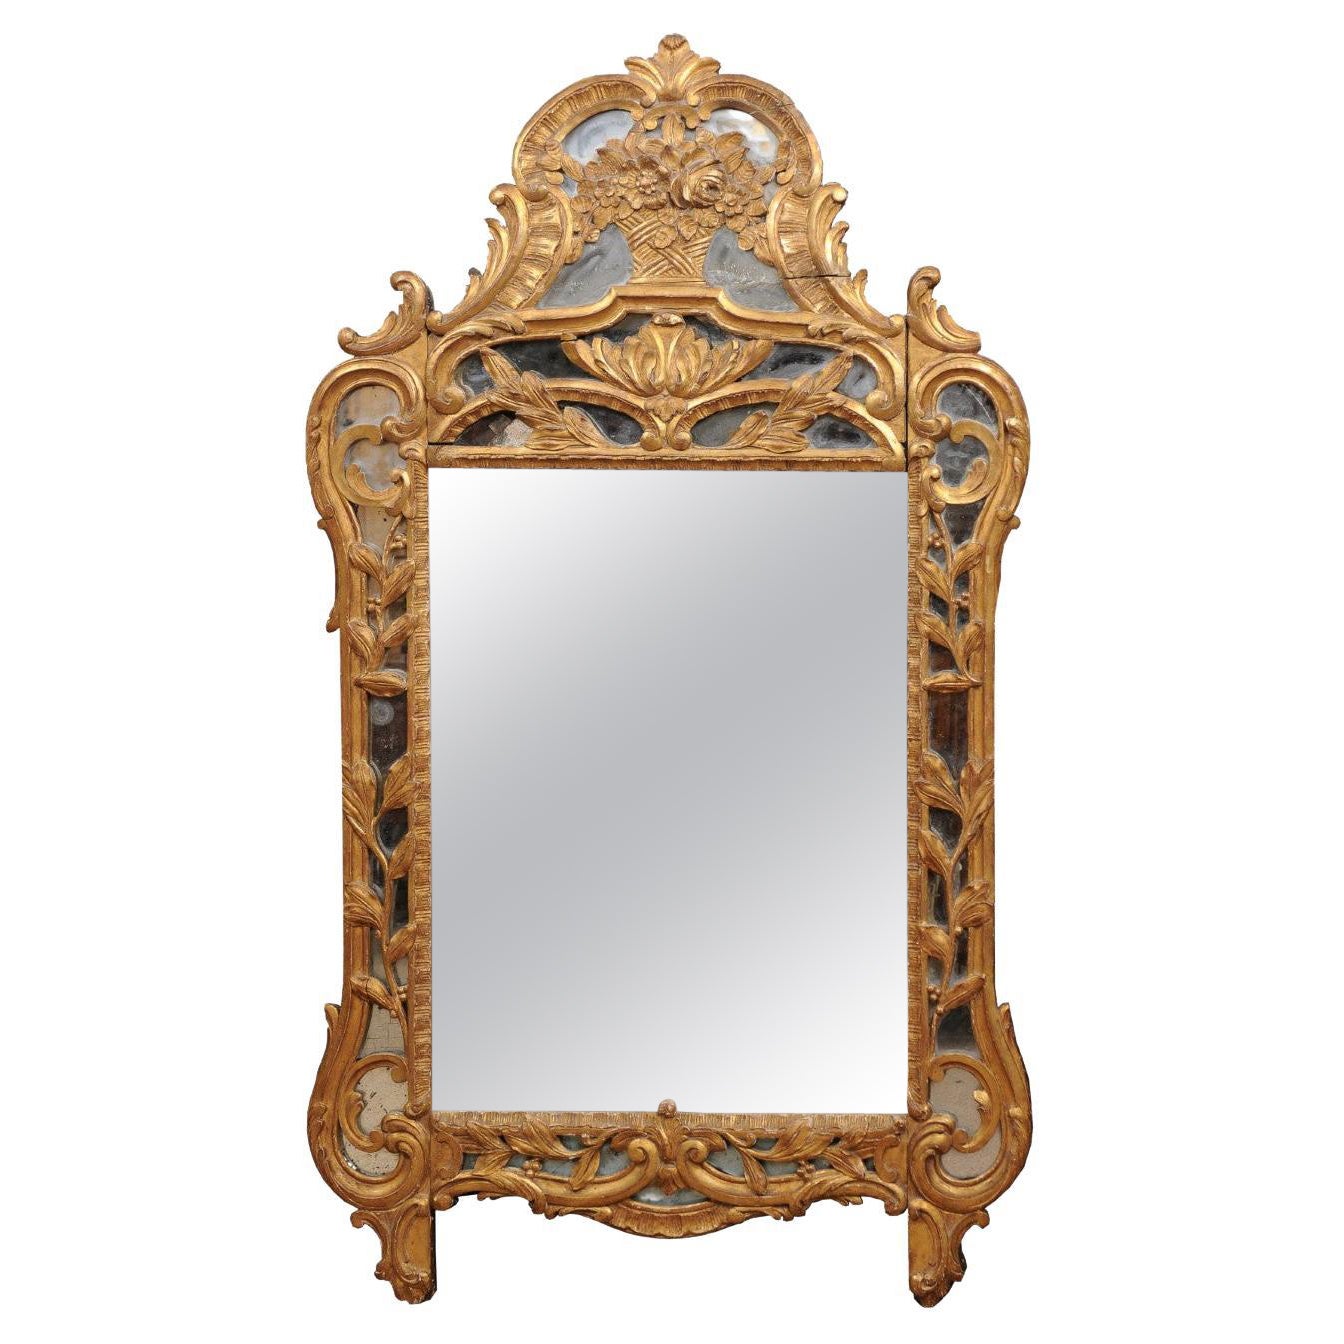 18th Century French Louis XV Giltwood Mirror with Floral Basket Crest For Sale